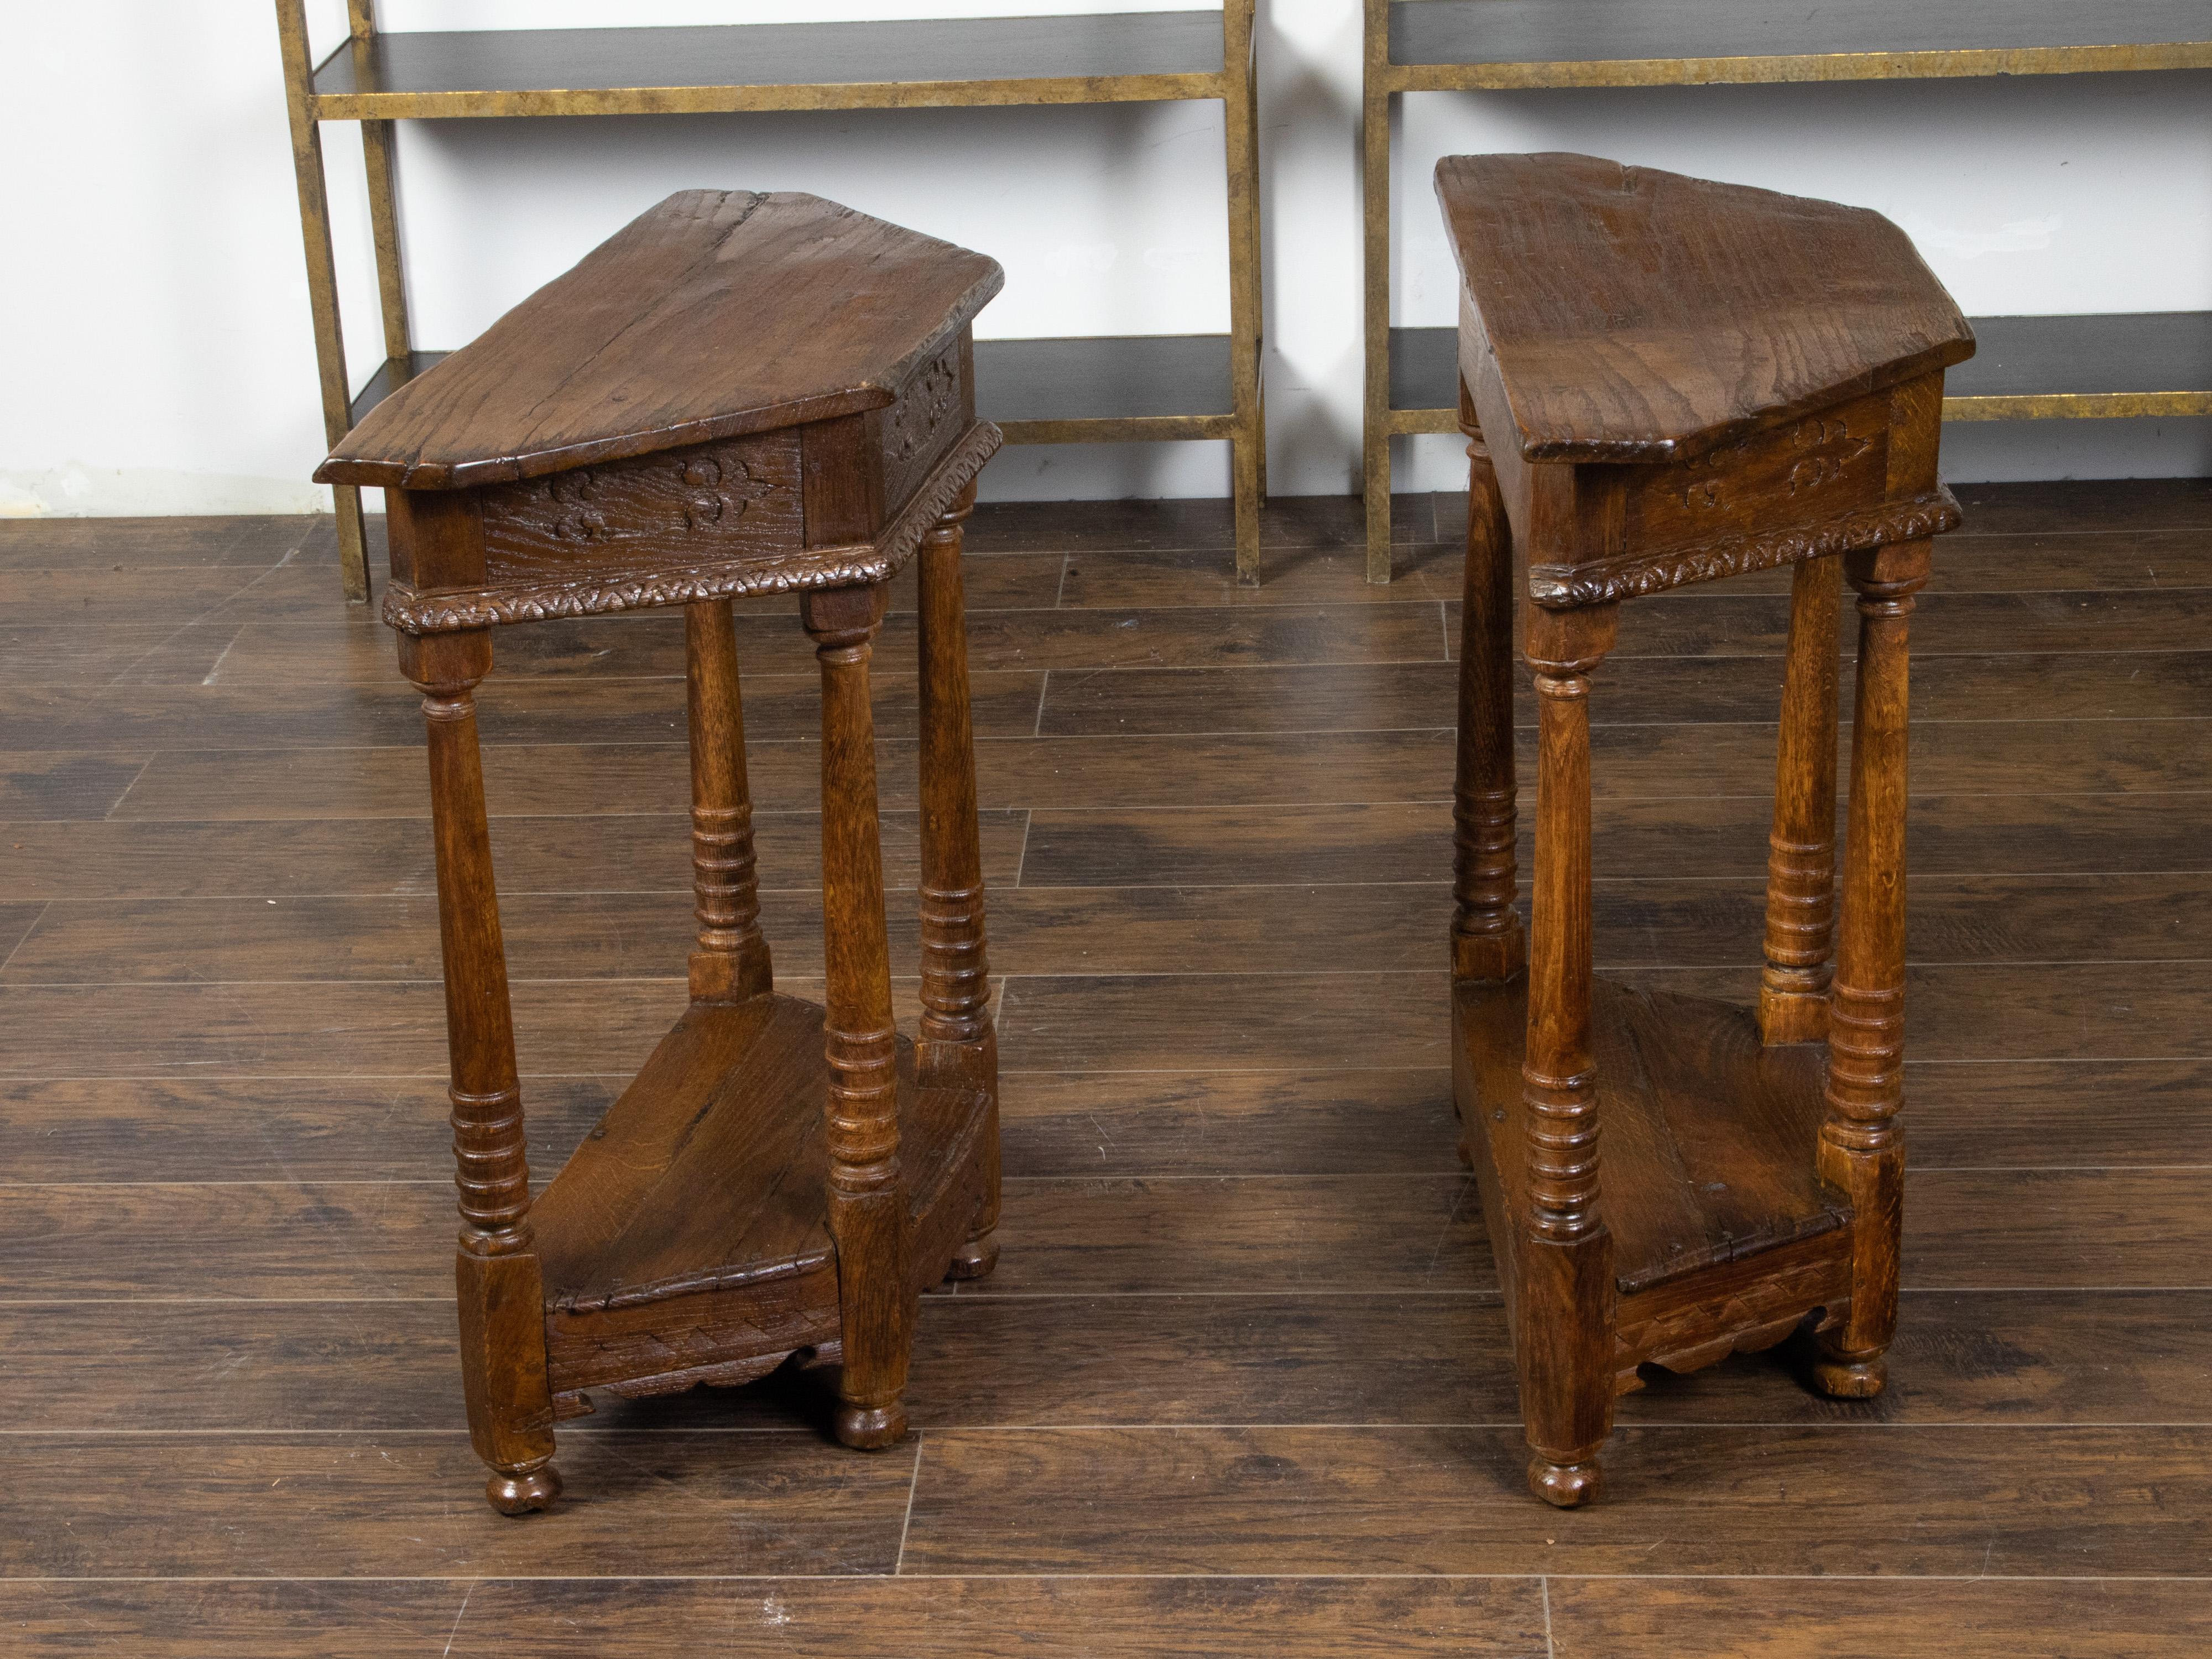 Pair of 19th Century English Carved Oak Demilune Tables with Column Legs In Good Condition For Sale In Atlanta, GA